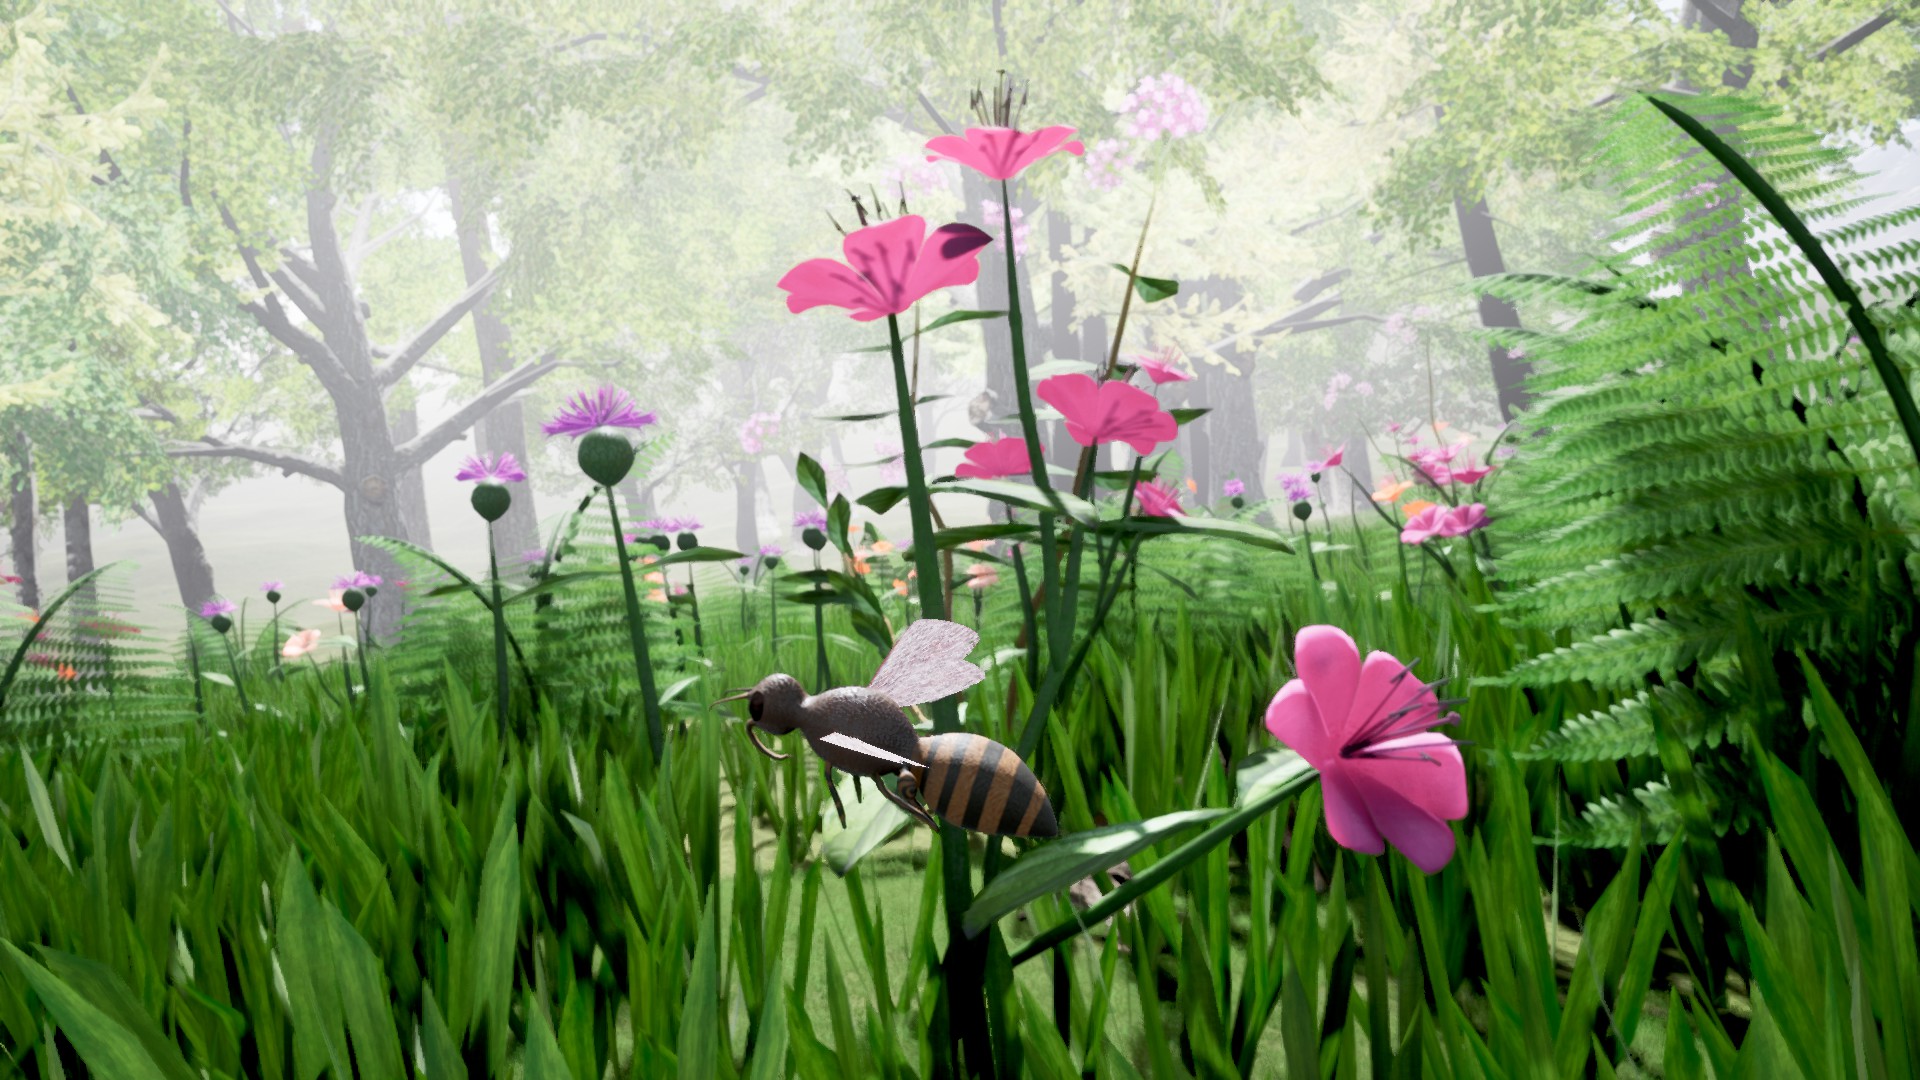 Nature And Life - Drunk On Nectar screenshot